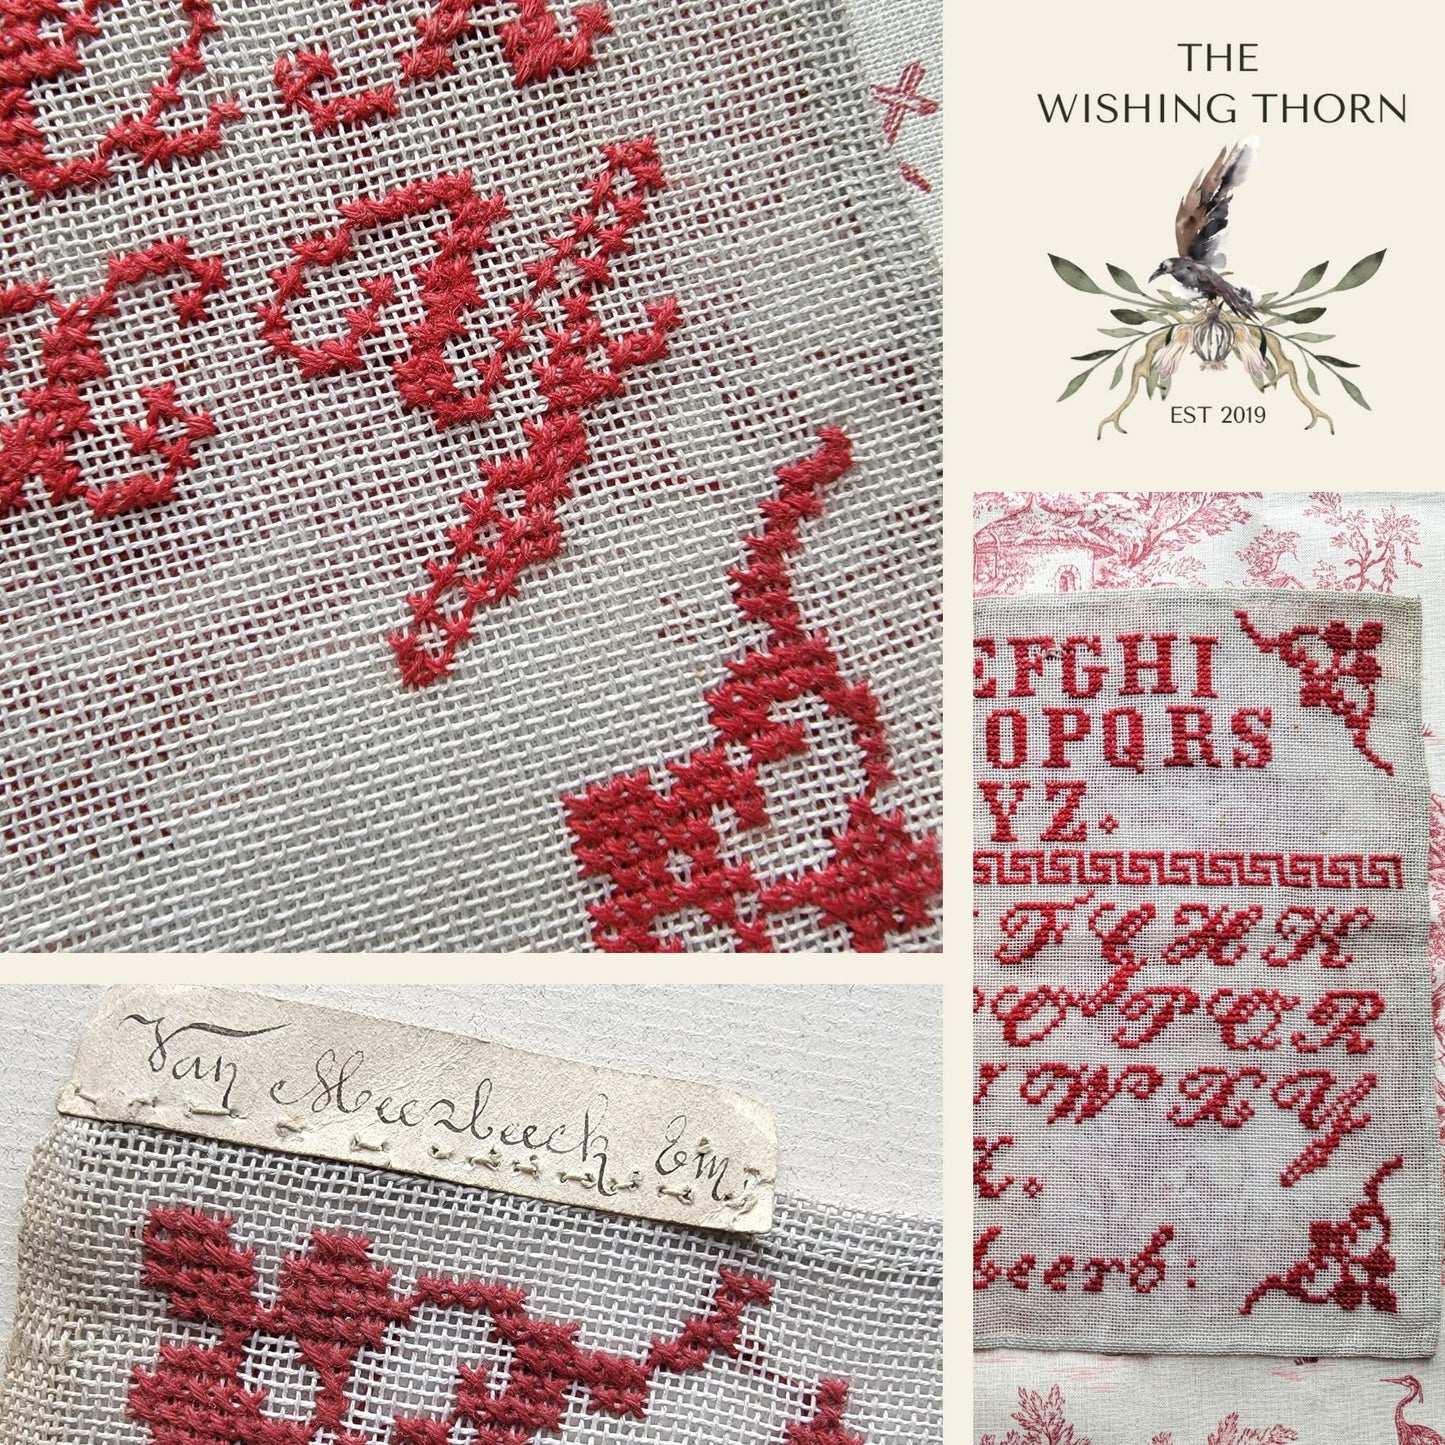 EV Meerbeck Reproduction Sampler by The Wishing Thorn